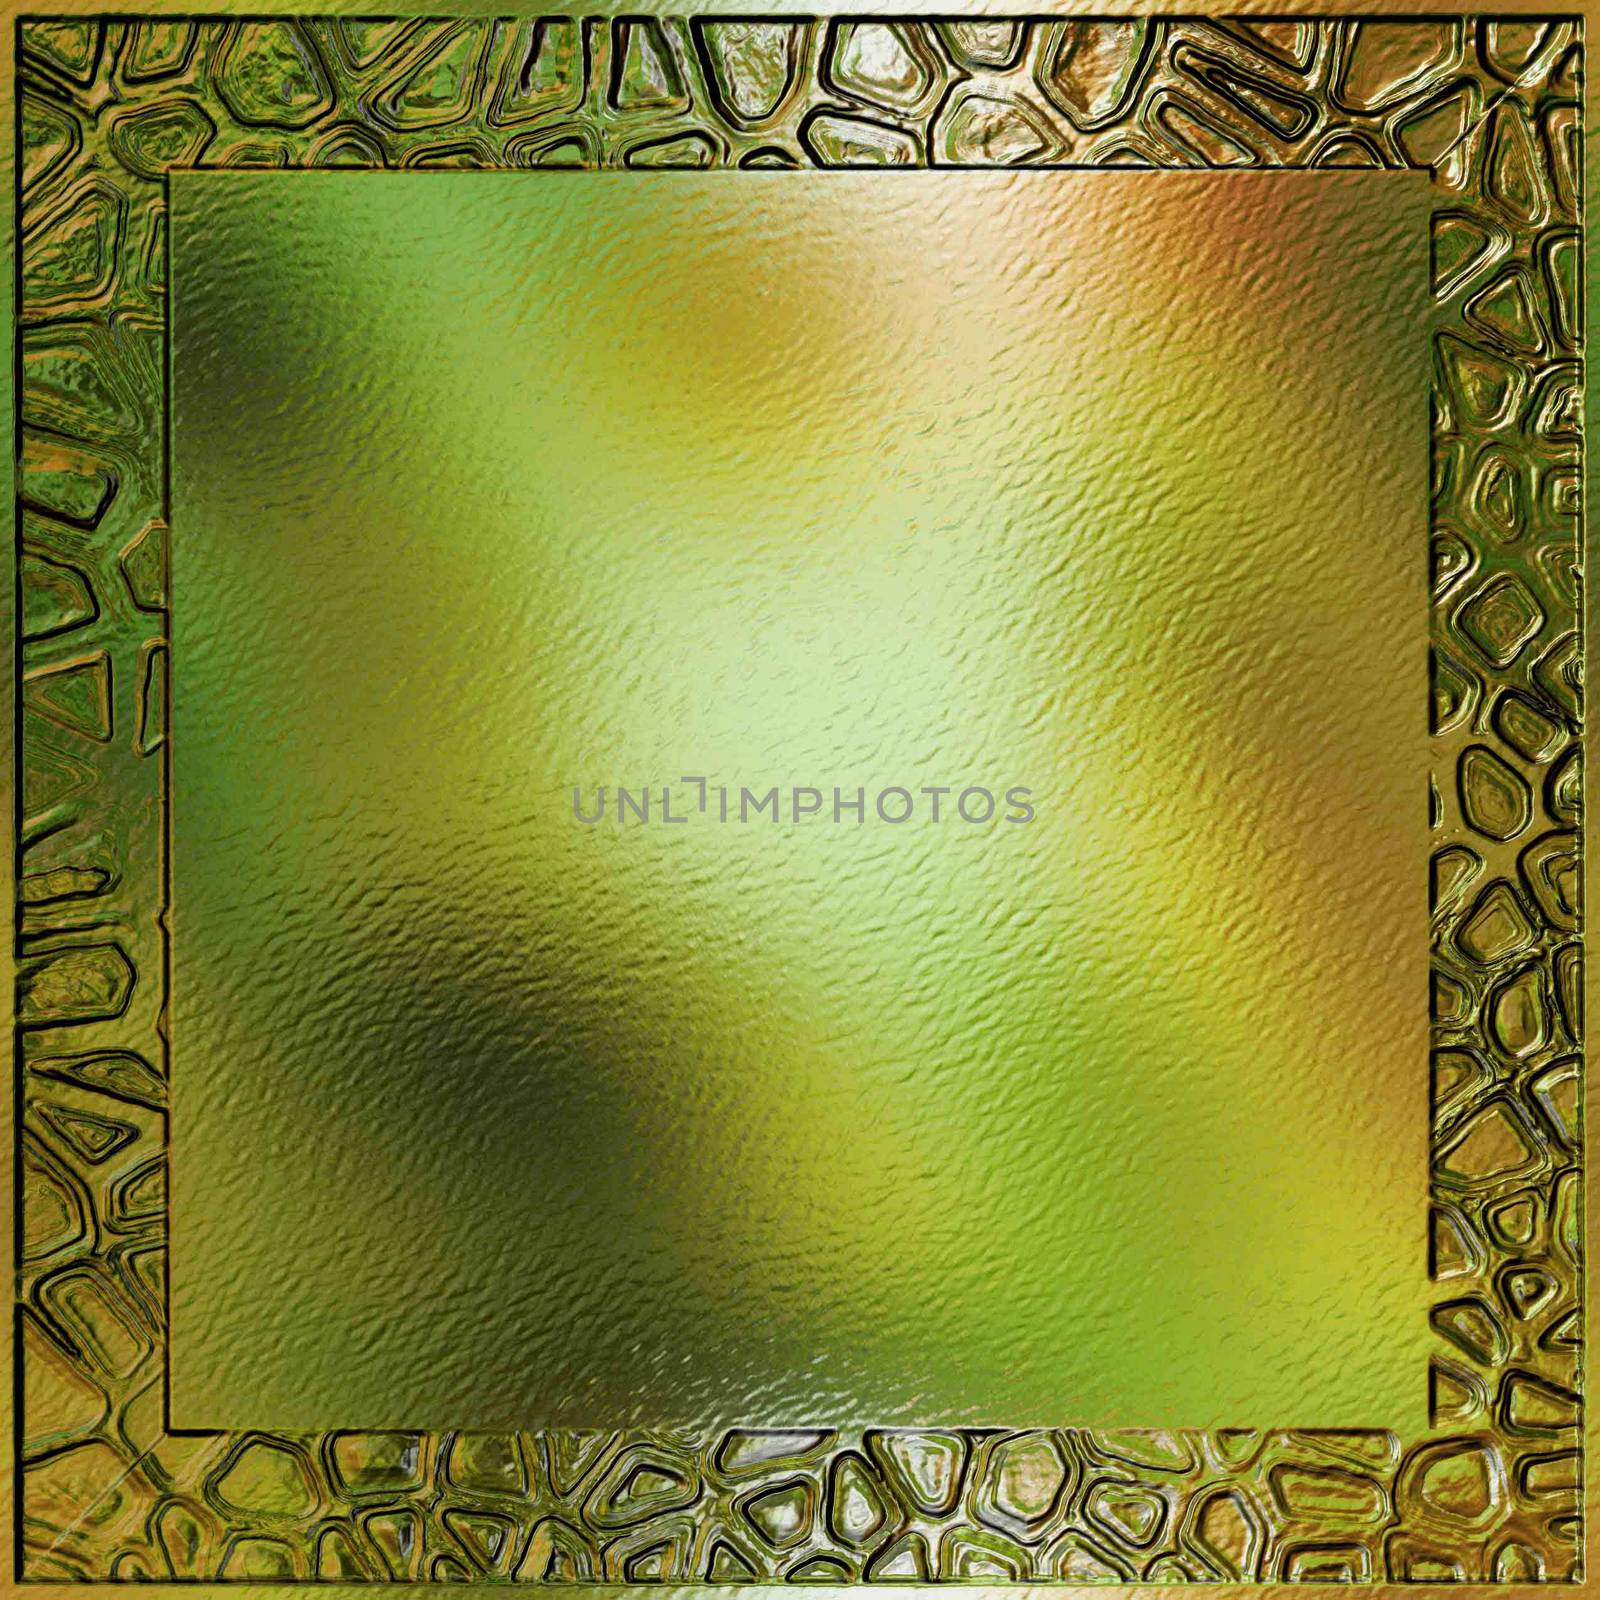 Translucent glass embossed rectangle yellow-green tone